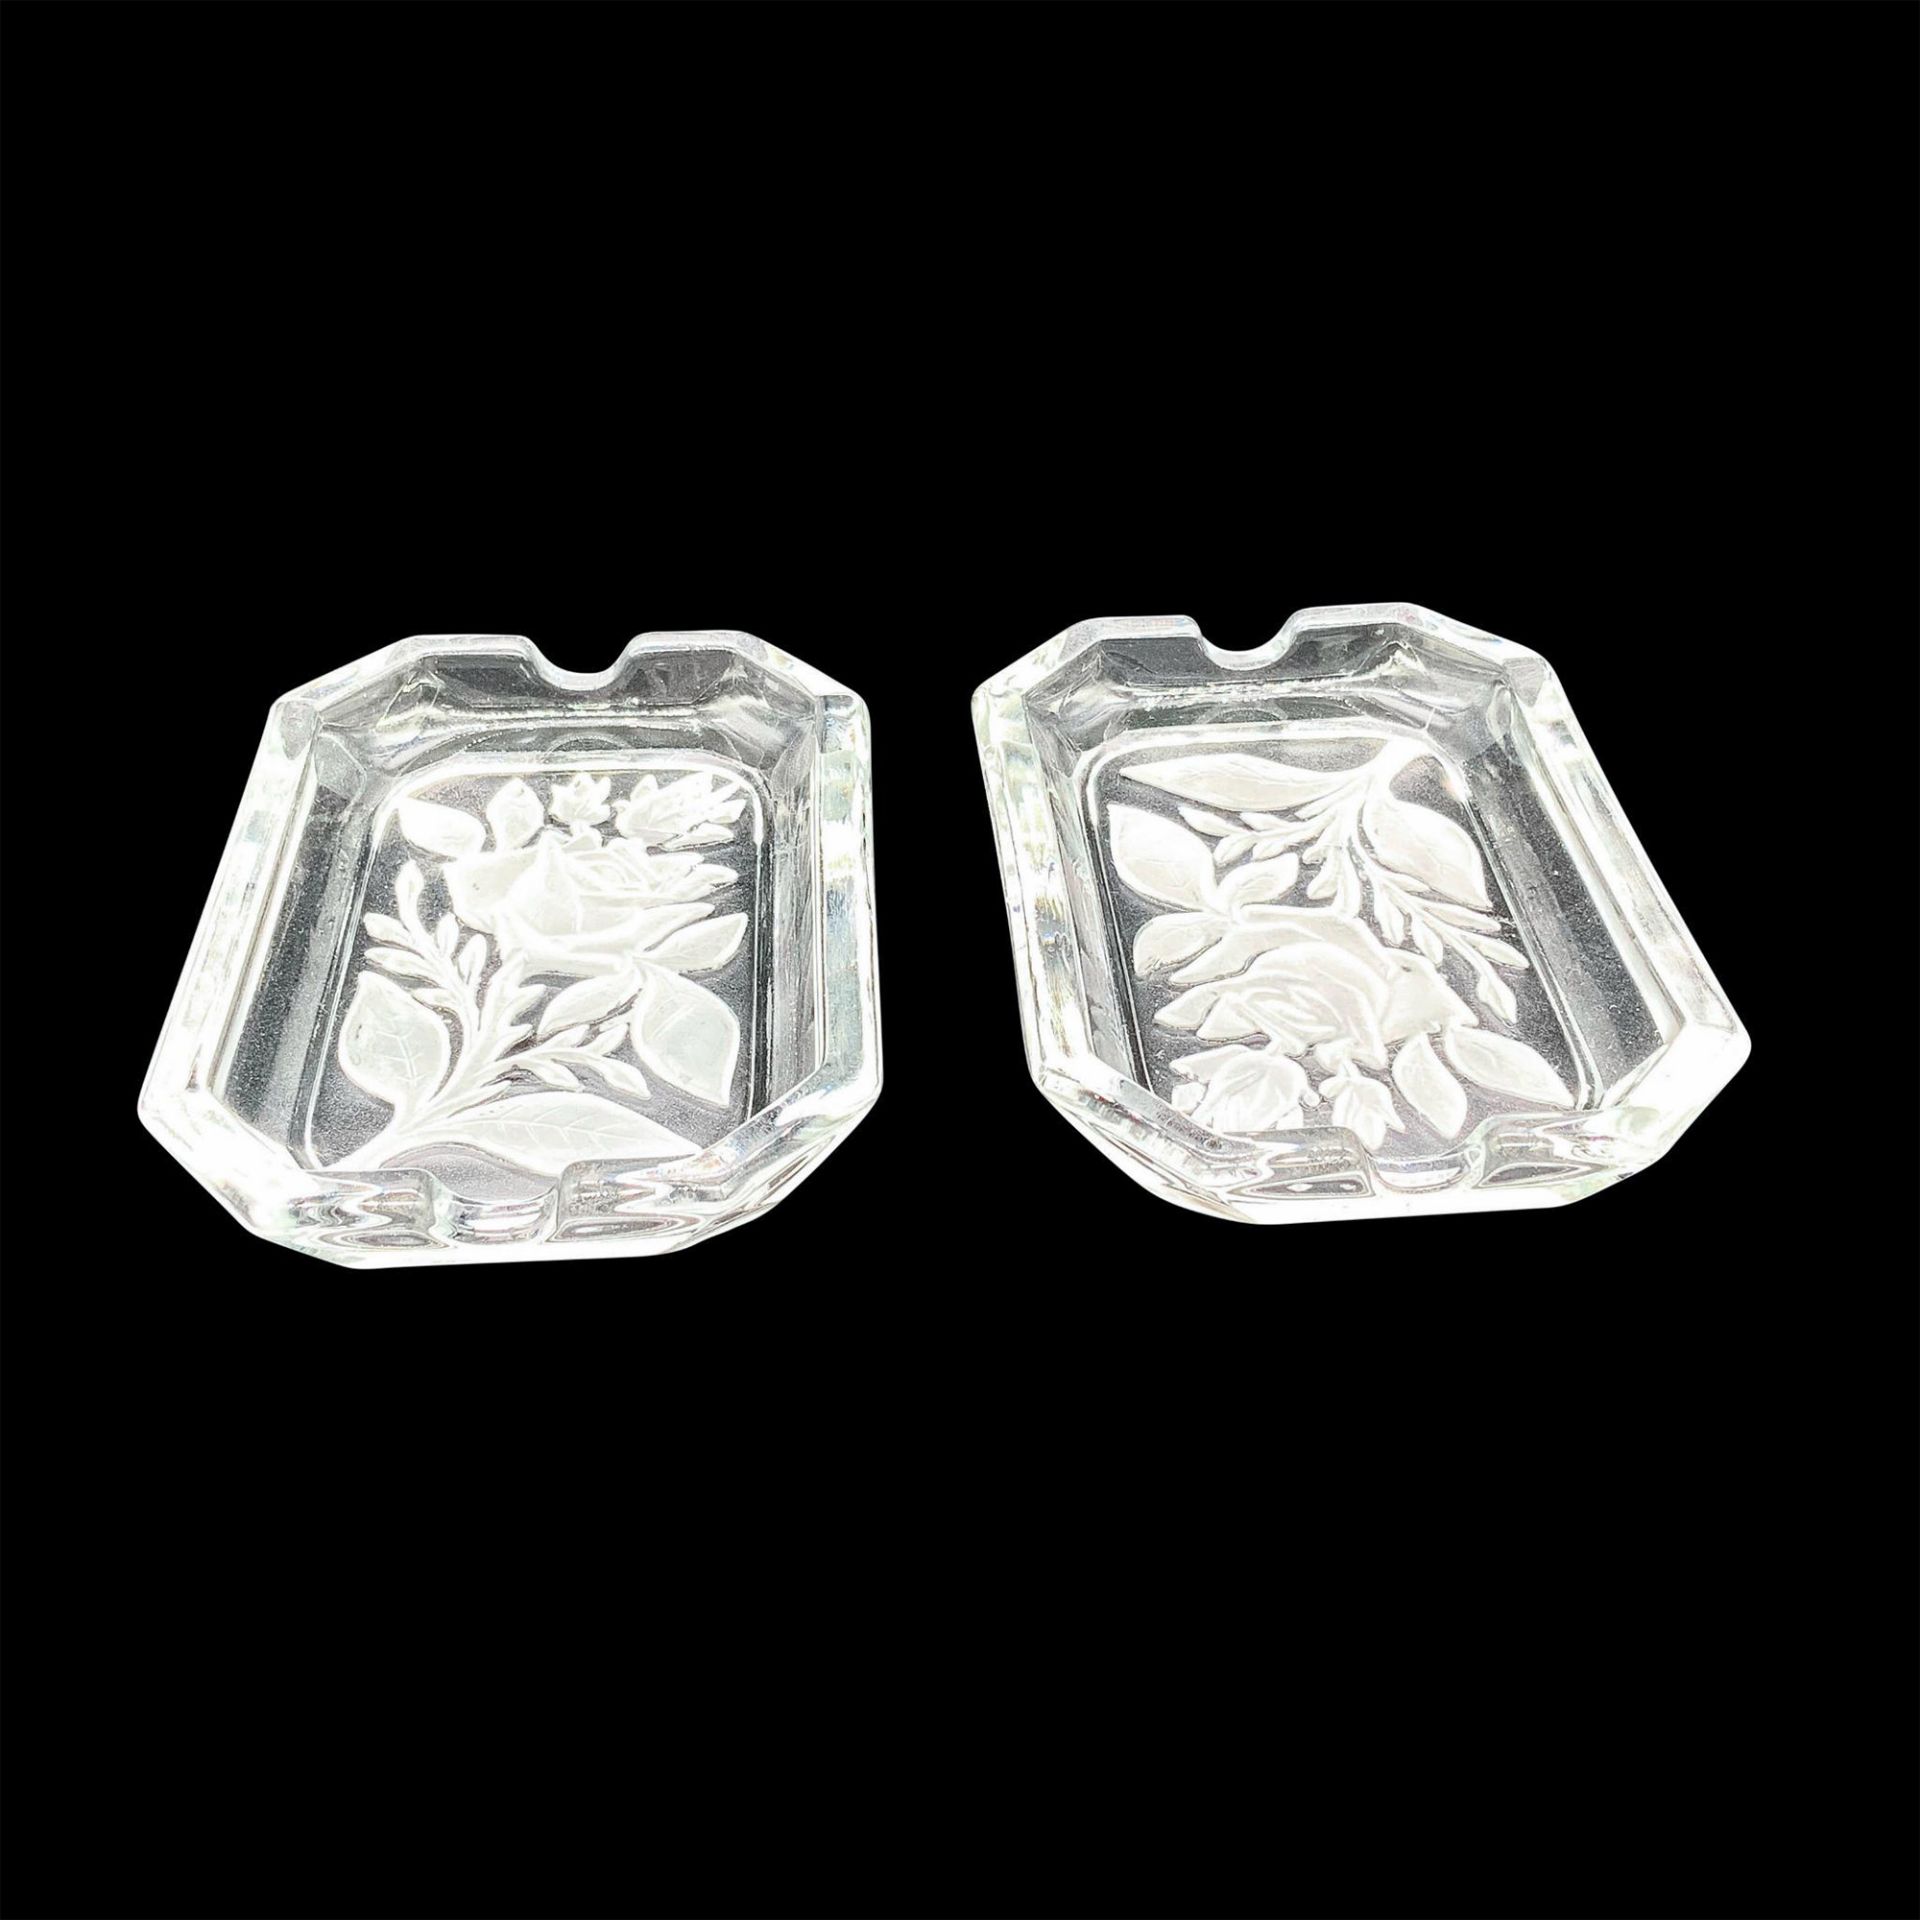 Pair of Vintage Glass Ashtrays, Roses - Image 2 of 3